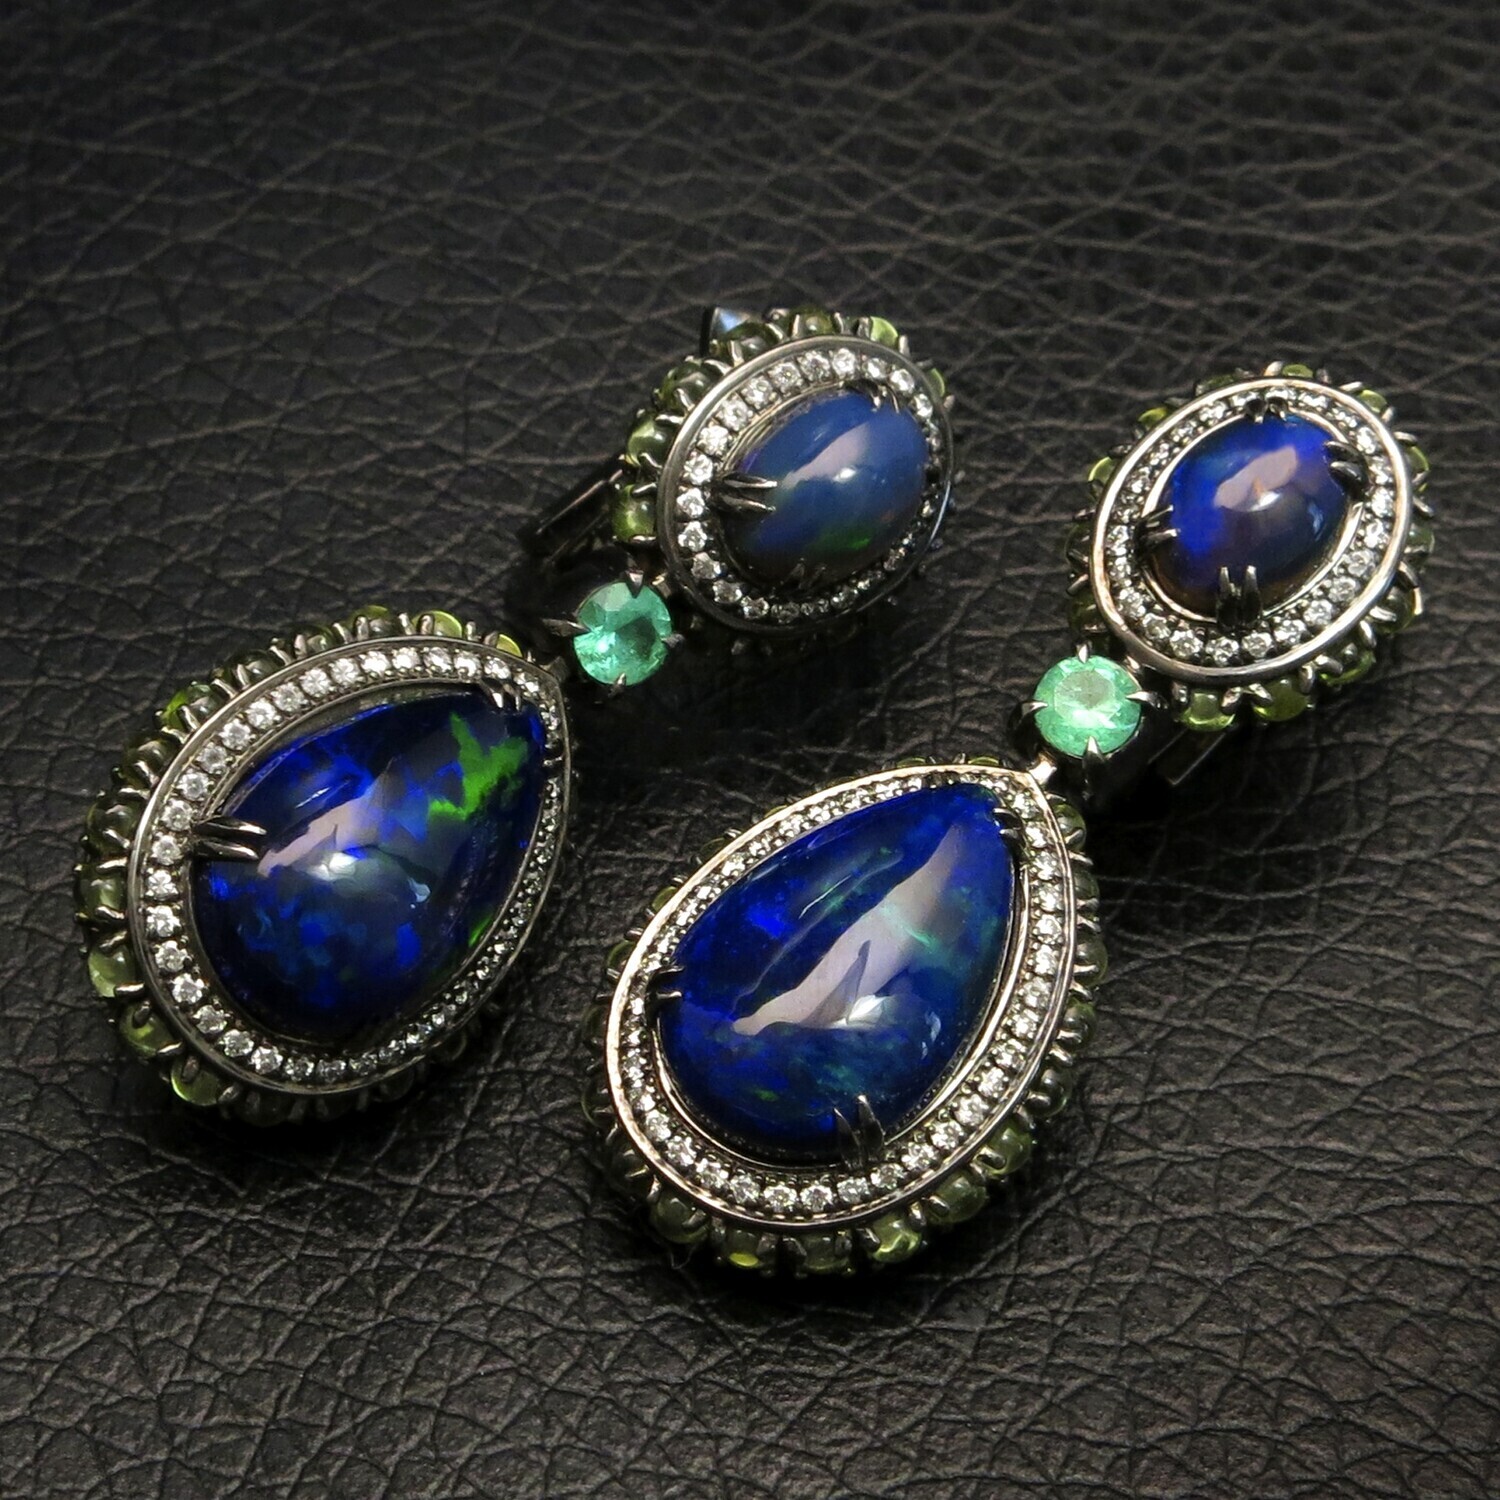 14K Gold Earrings with Opals, Diamonds and Chrysolite, VH007